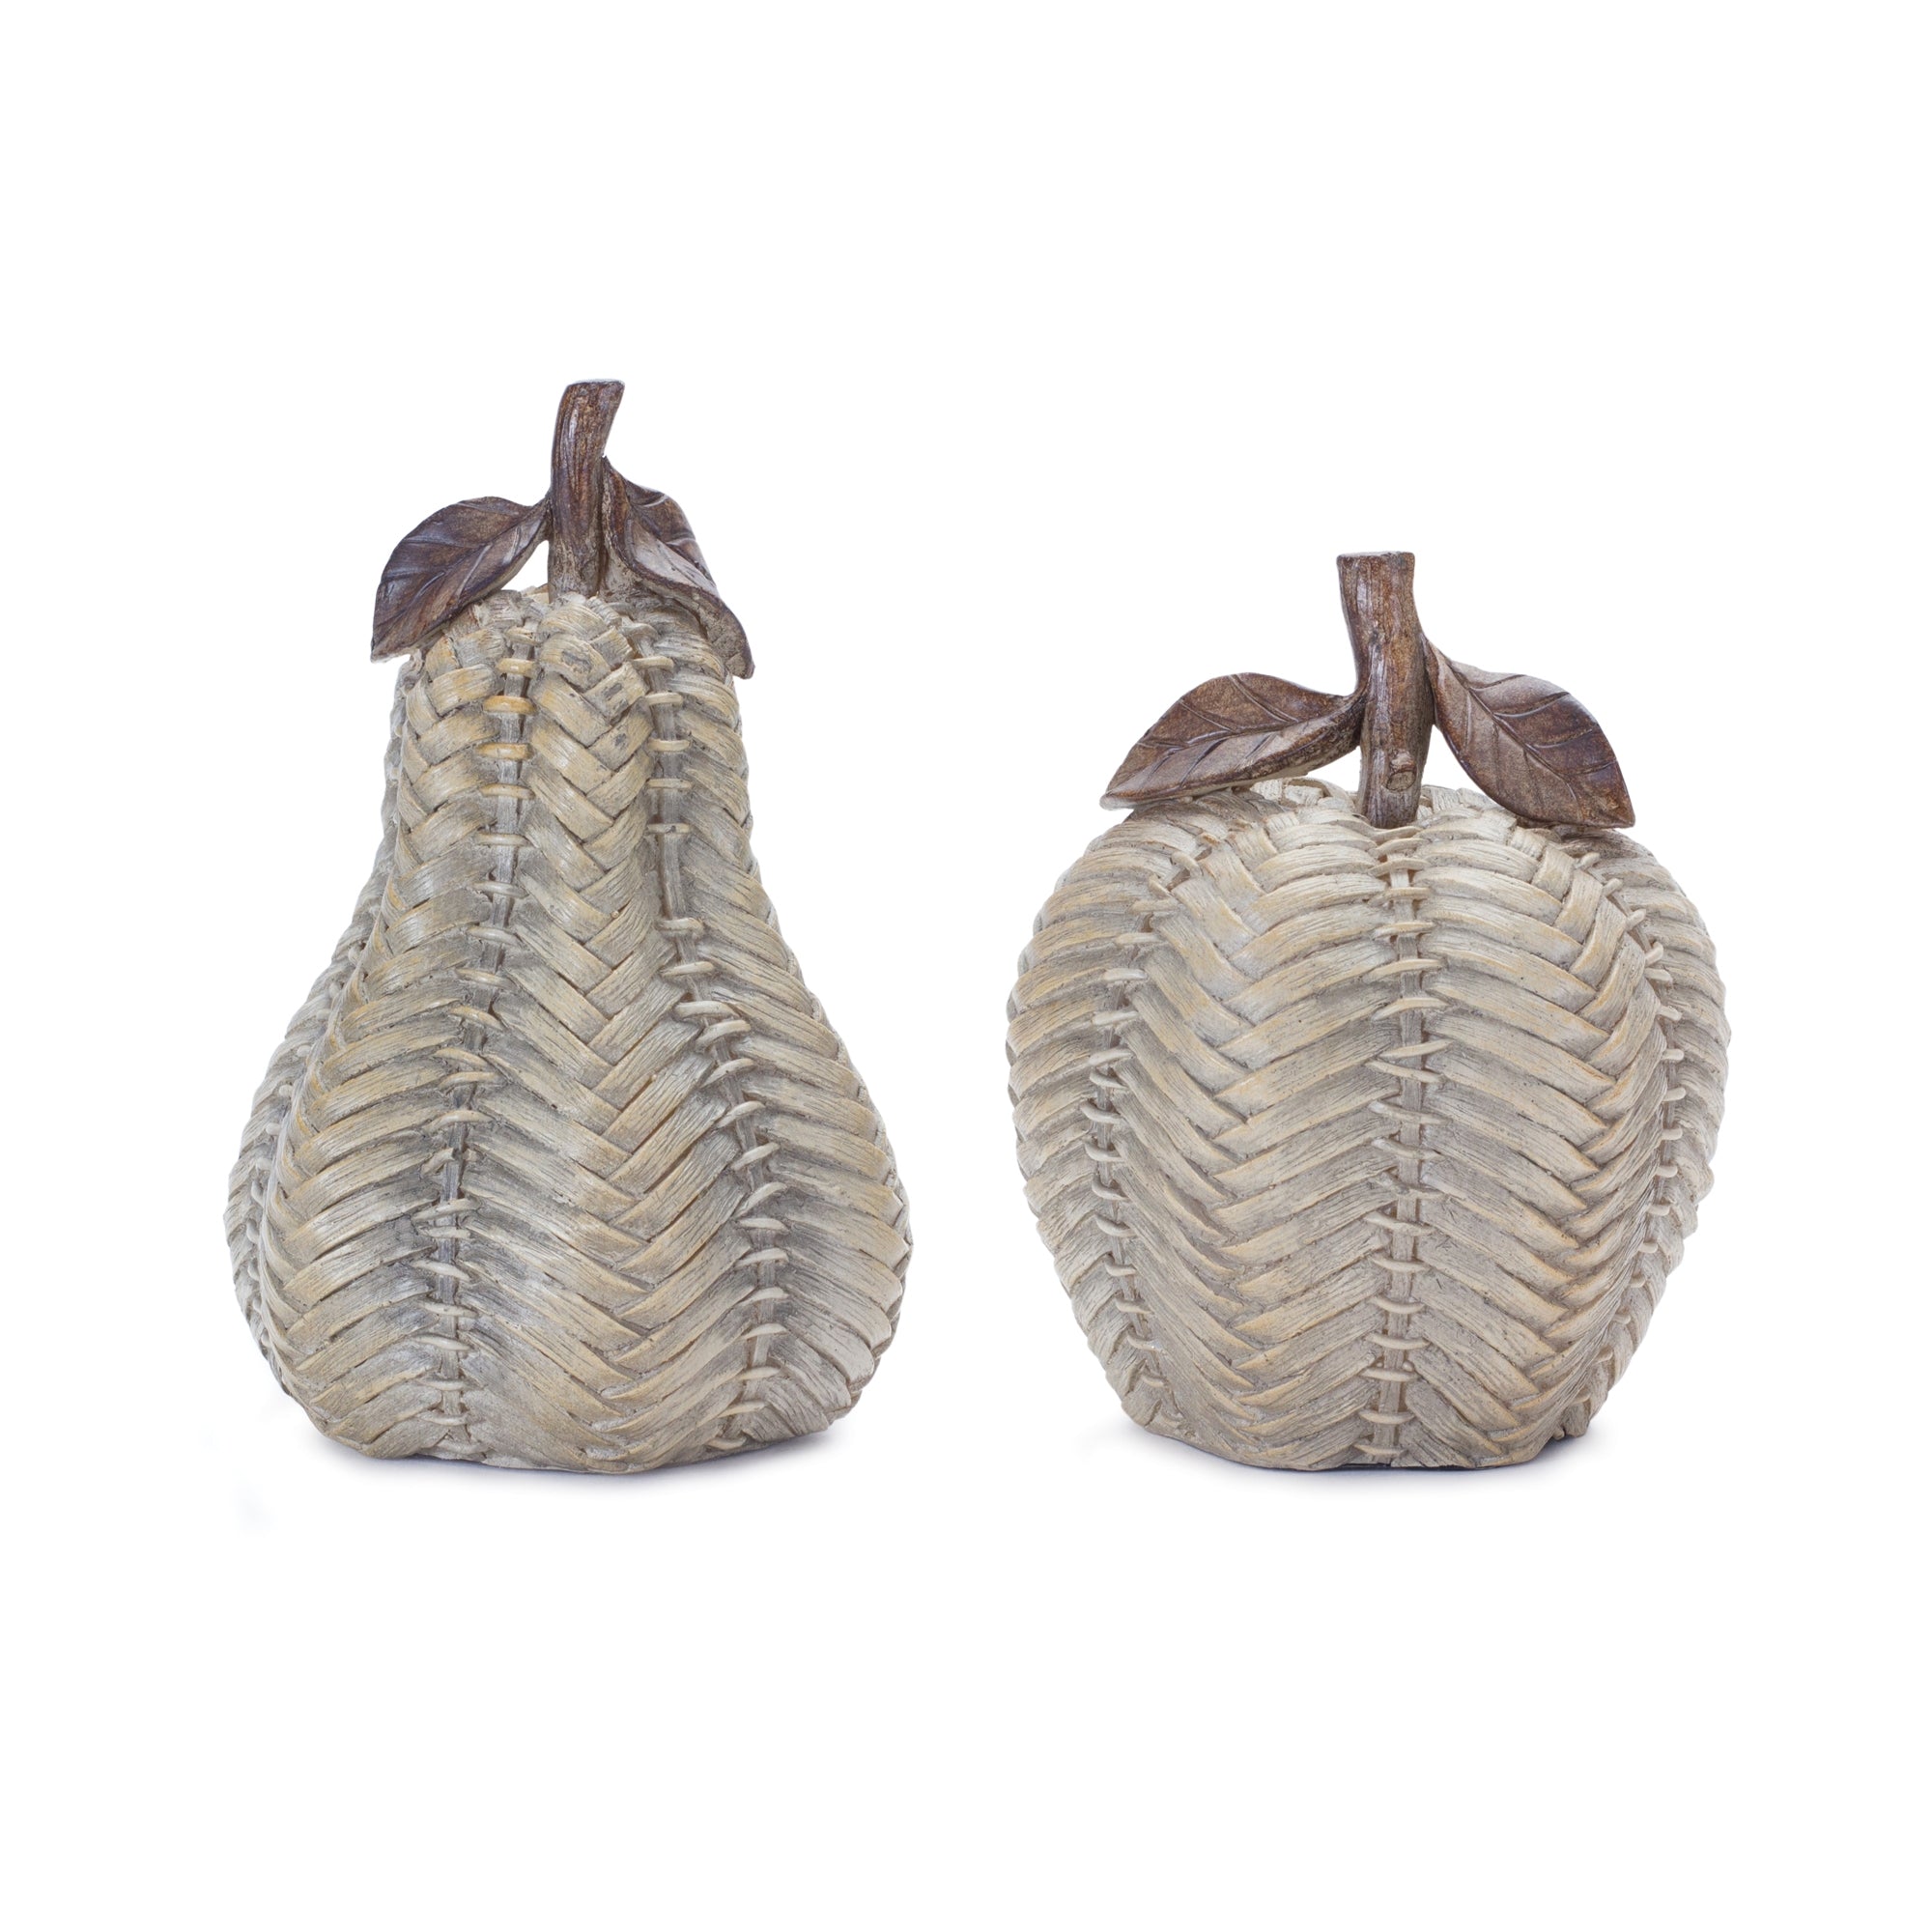 Wicker Apple and Pear Décor (Set of 2)